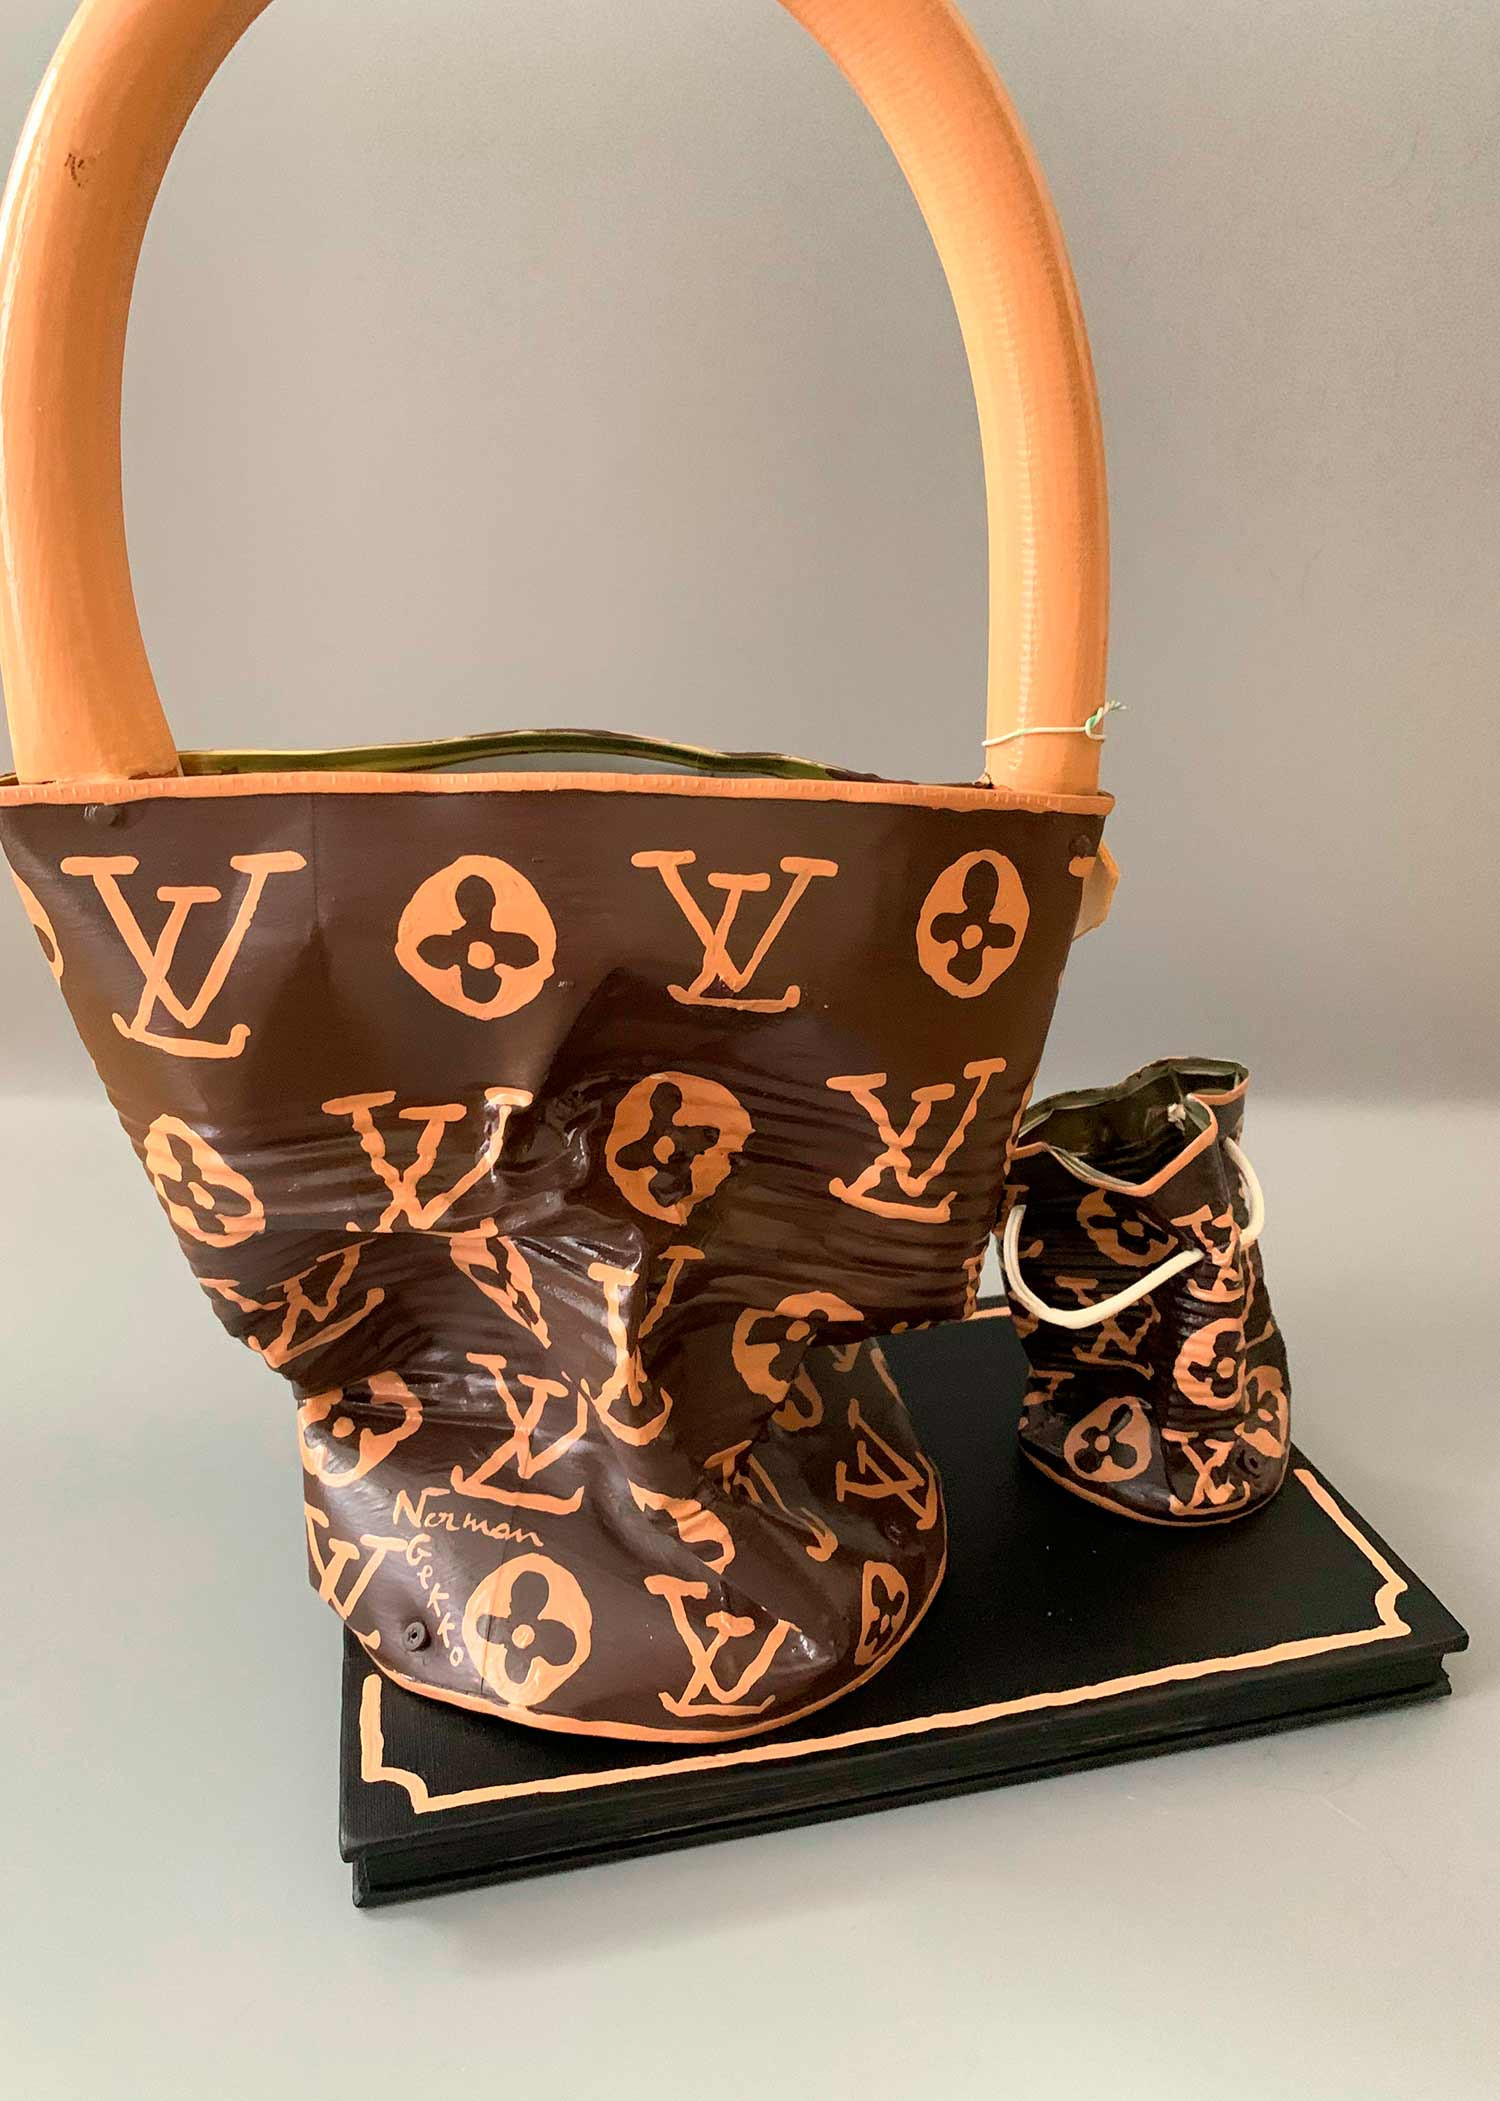 Contemporary Art - Mixed media on steel - Crushed Louis Vuitton